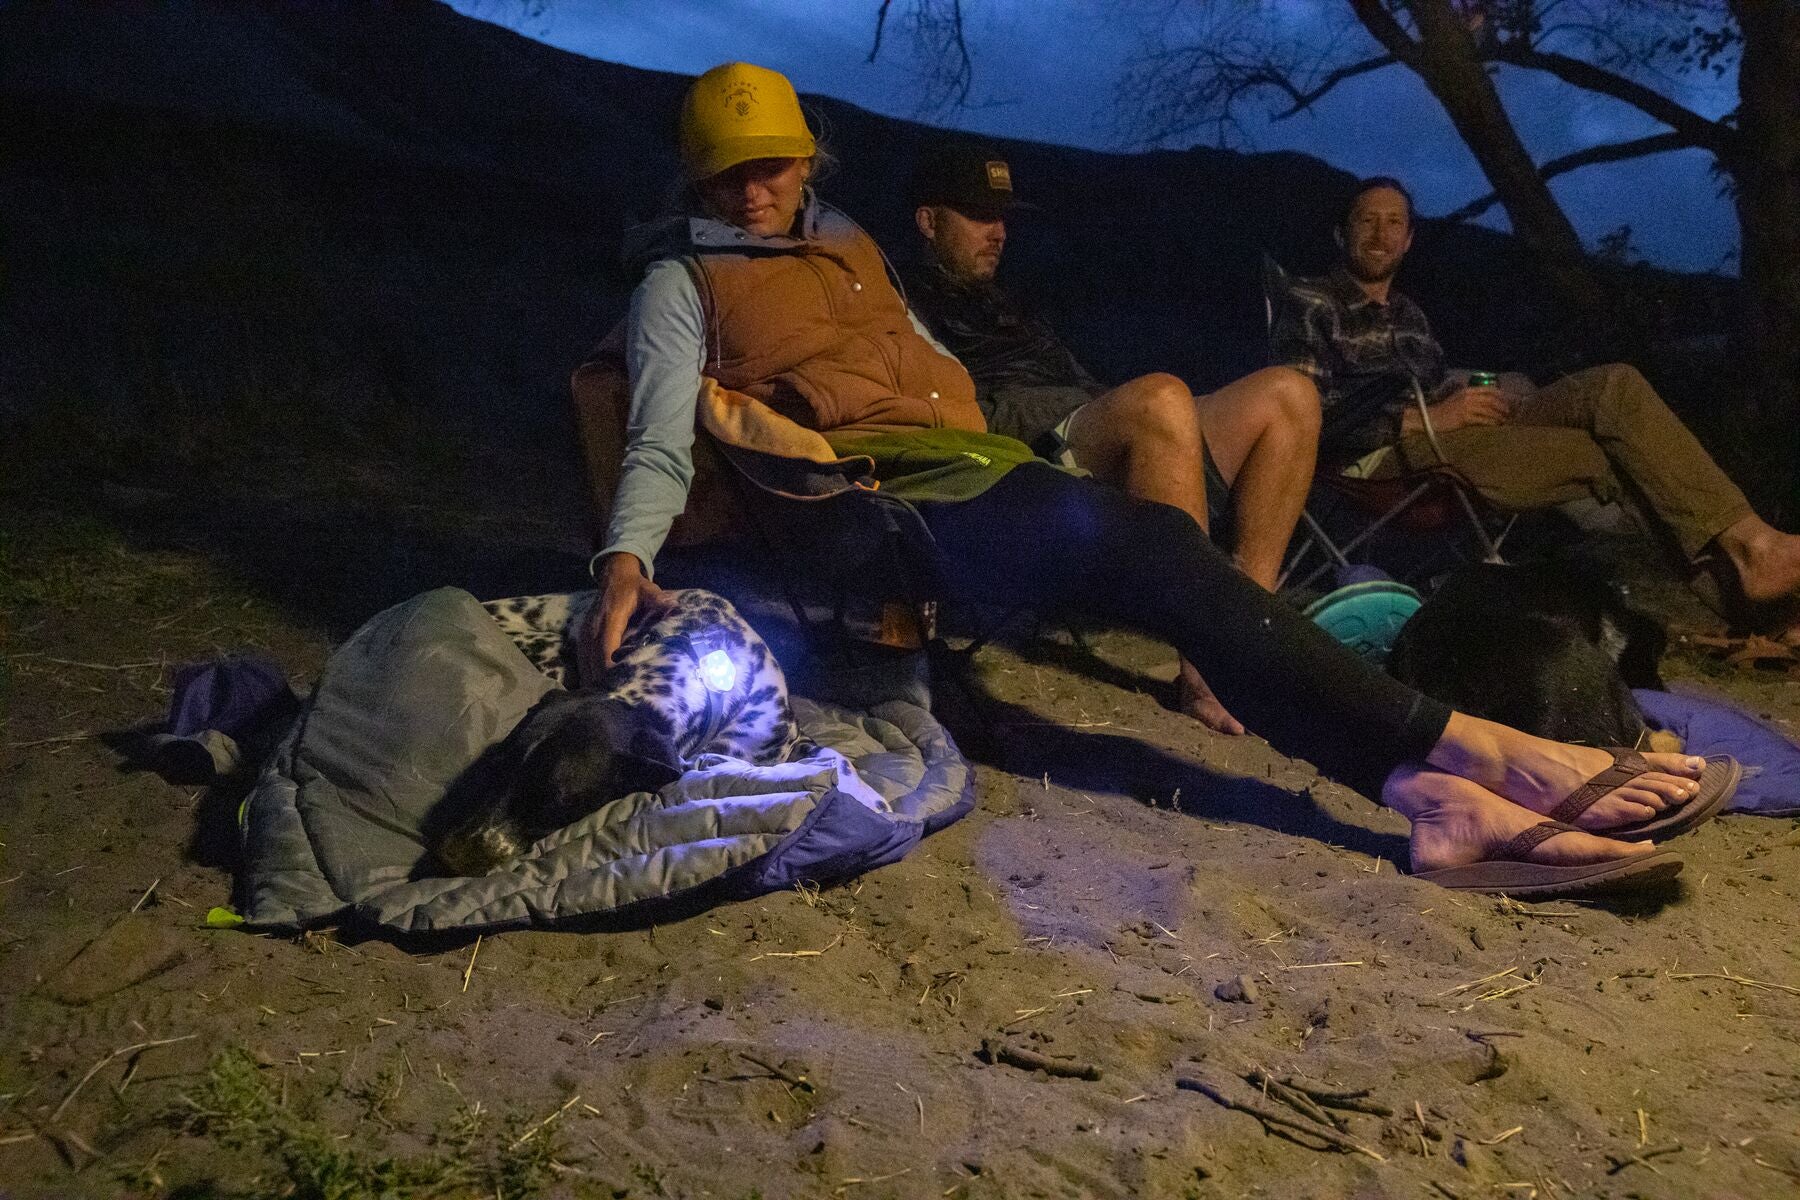 At night, three people camp with their dog on the sand. 